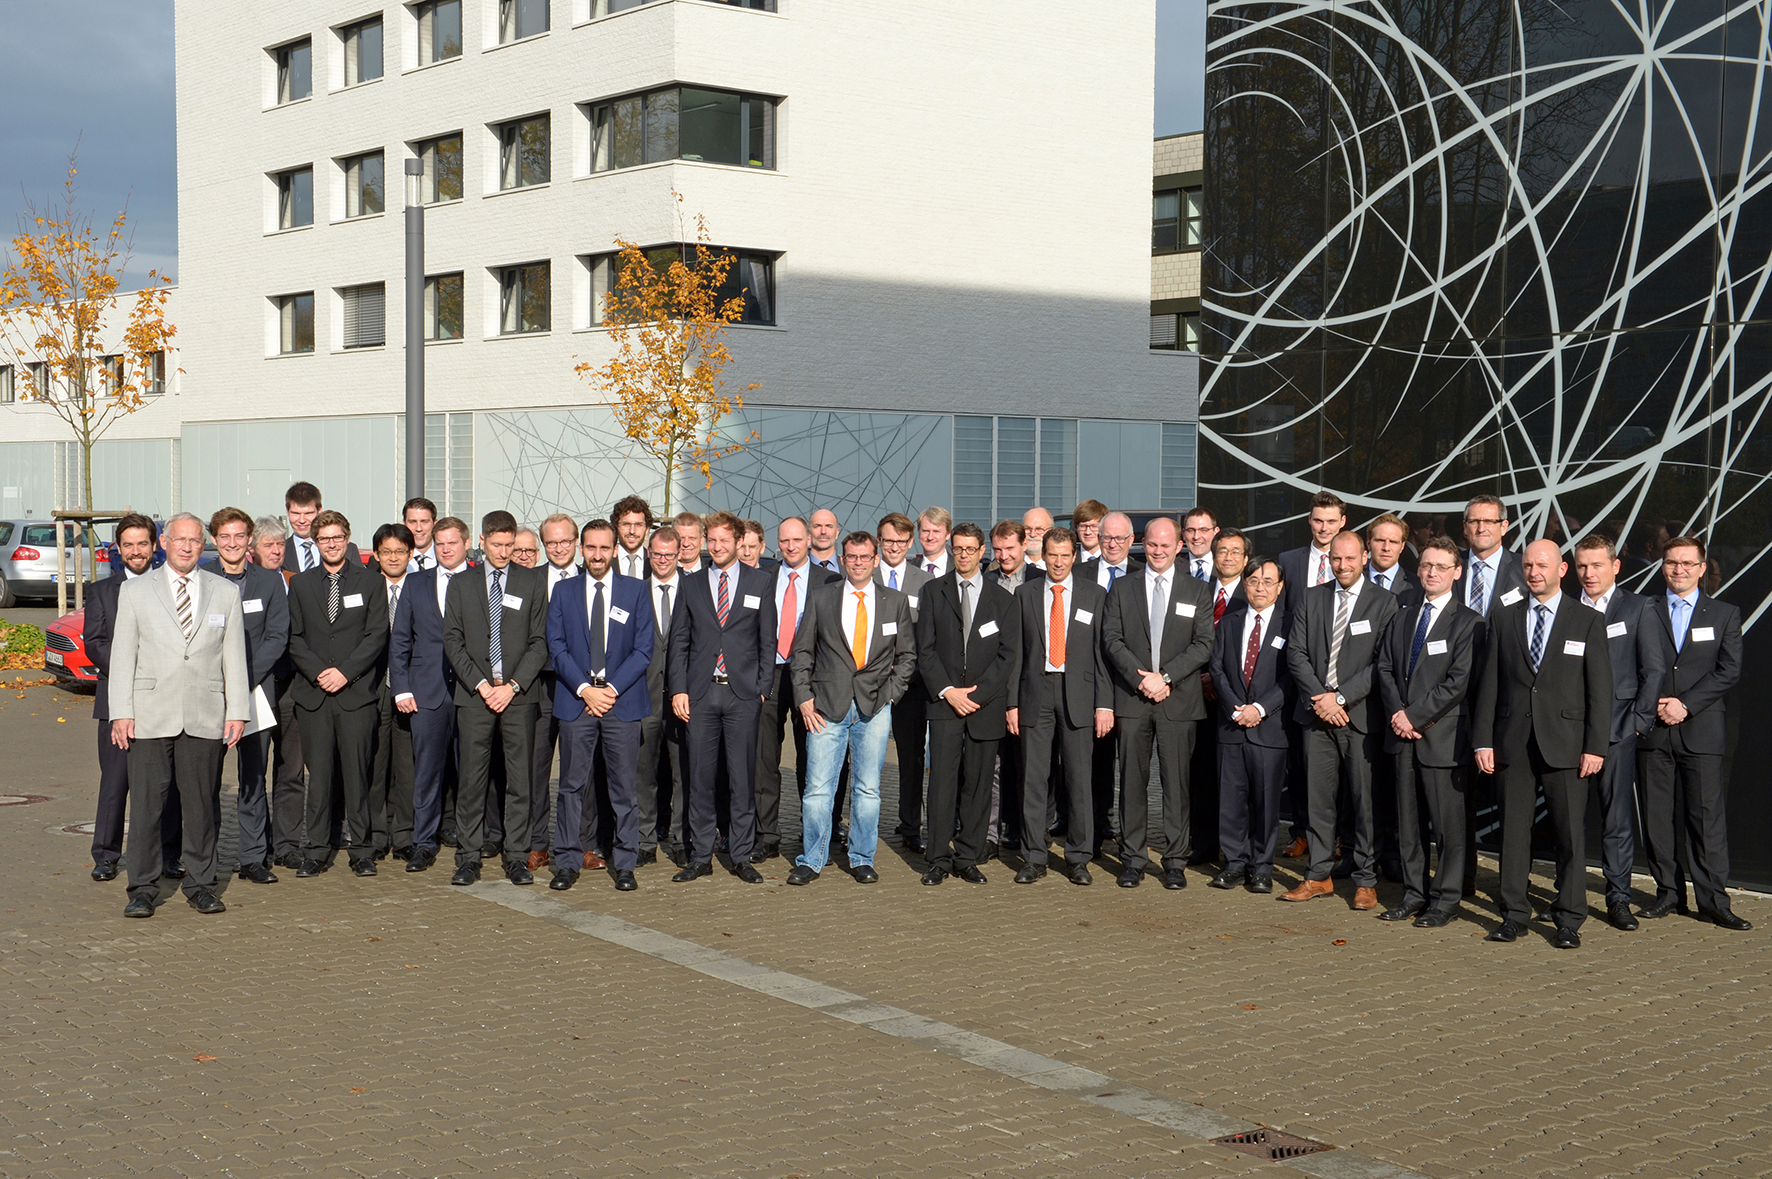 At the end of October 2015, experts from all over the world came together in Aachen for the launch of the International Center for Turbomachinery Manufacturing (ICTM).